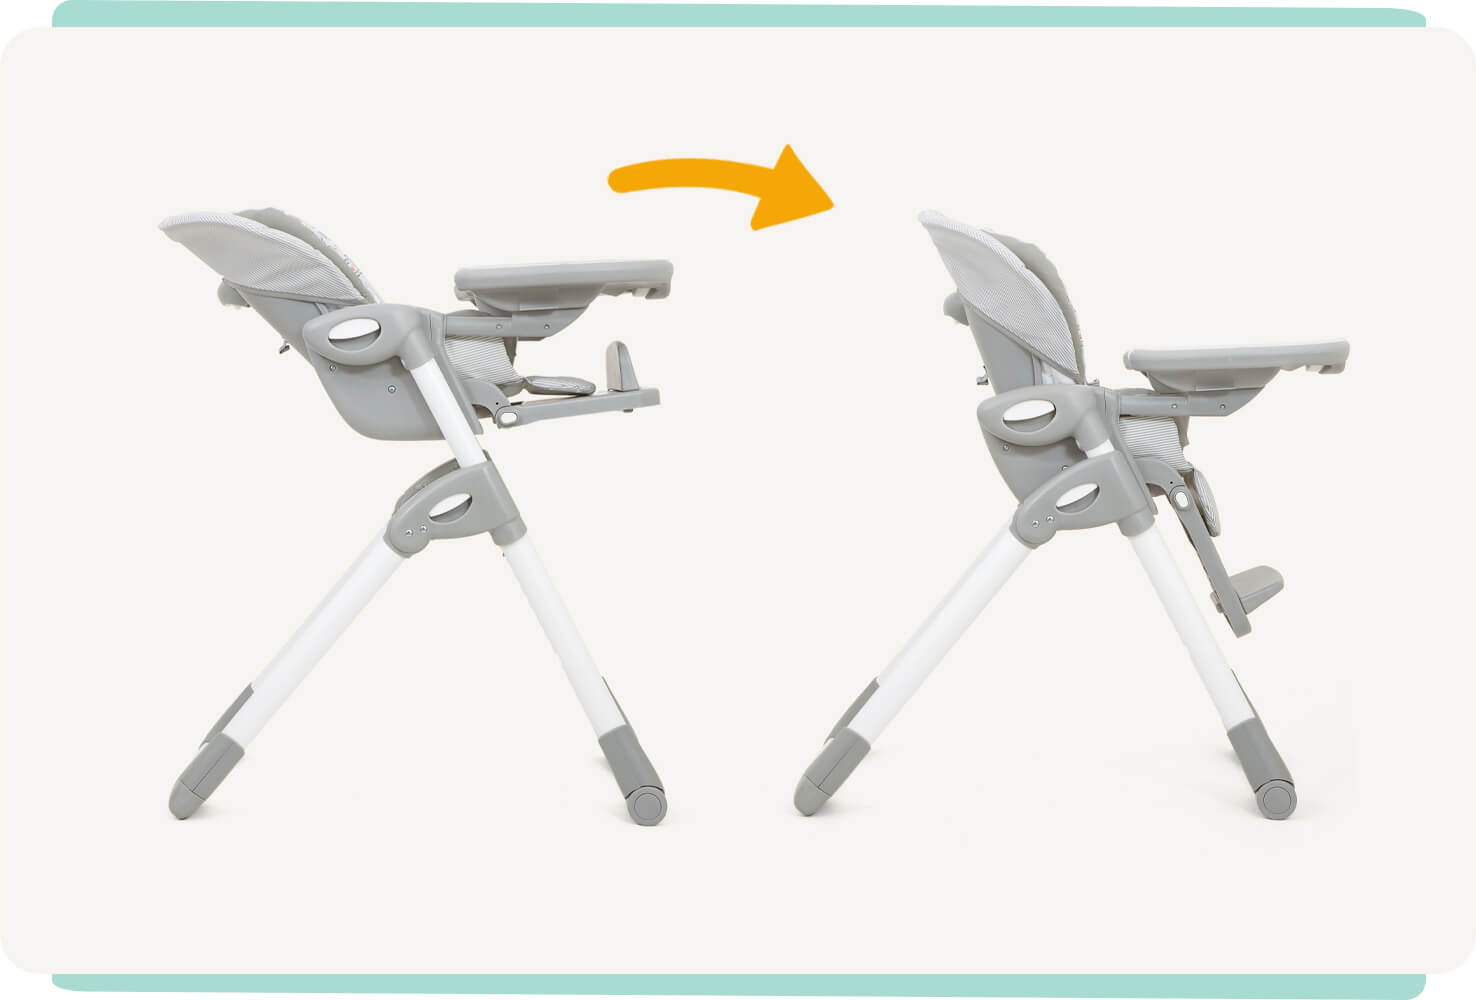  Two gray Joie Mimzy 2in1 highchairs side by side, in profile showing the maximum height on the left and minimum height on the right, with an orange arrow in between.